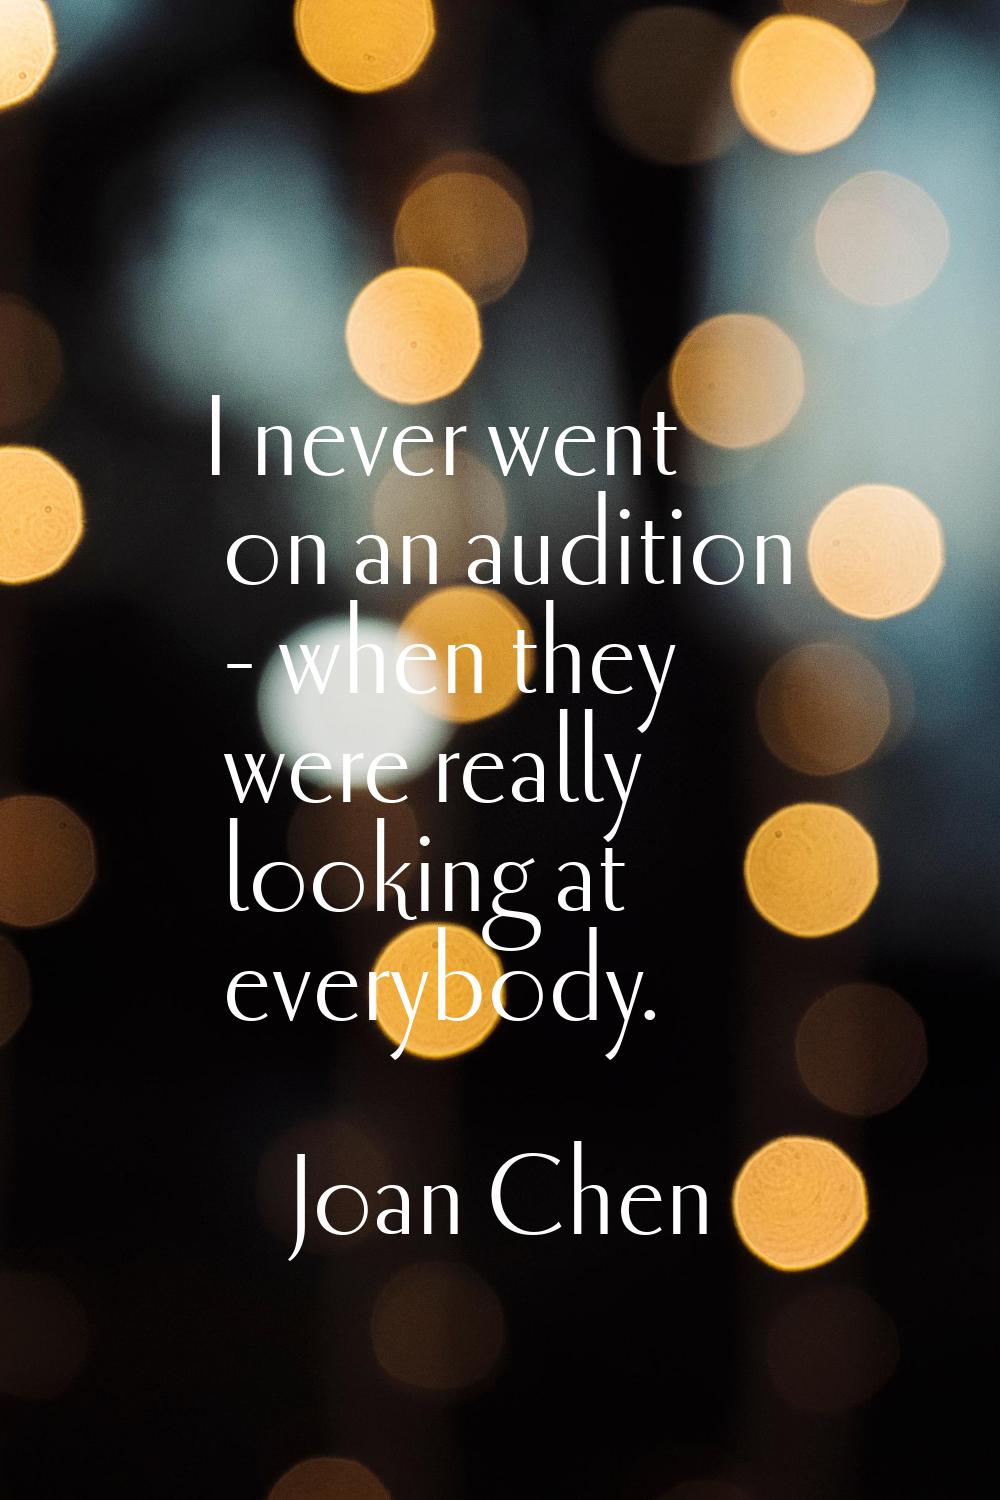 I never went on an audition - when they were really looking at everybody.